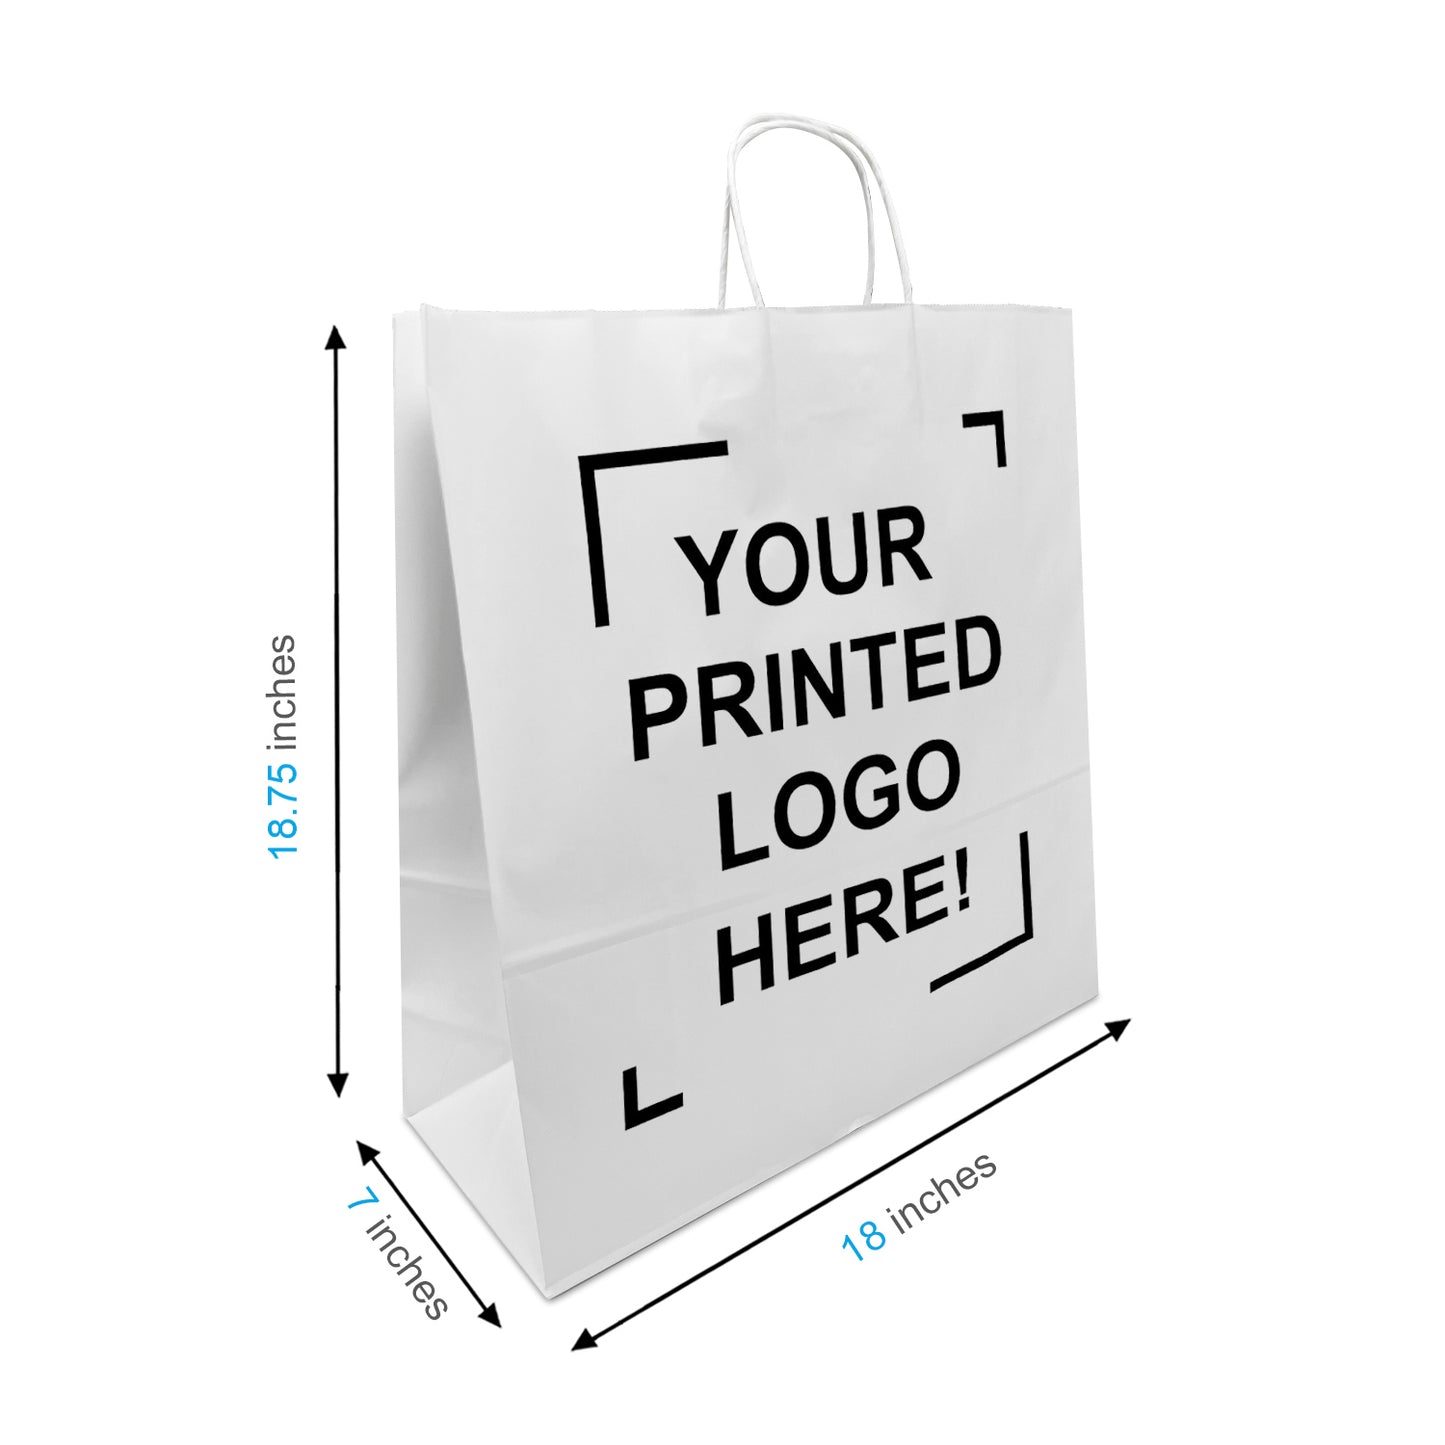 200 Pcs, Jumbo, 18x7x18.75 inches,White Paper Bags, with Twisted Handle, Full Color Custom Print